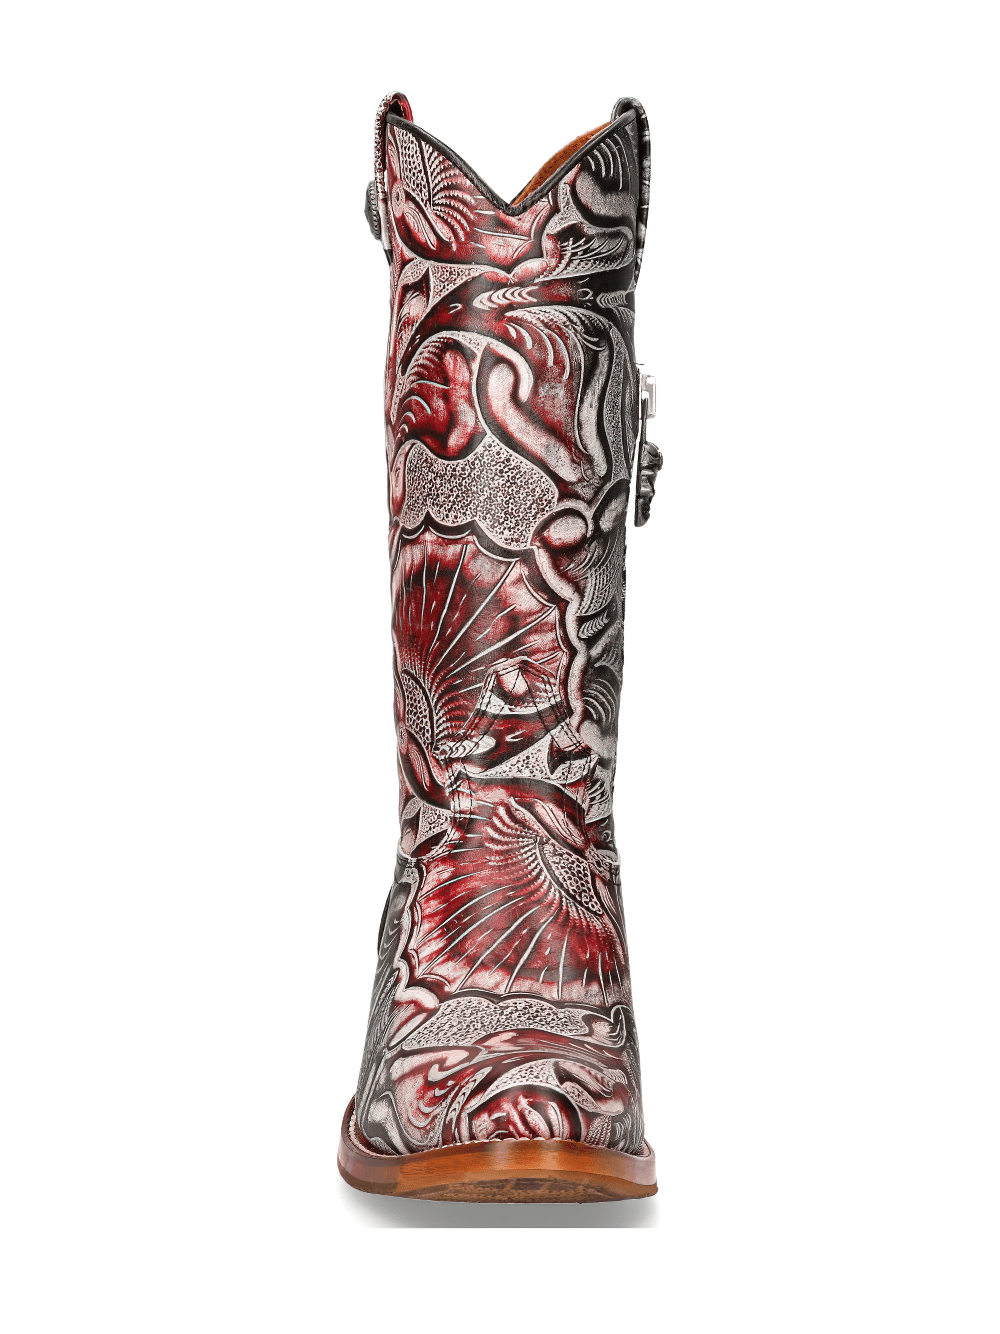 NEW ROCK Exotic Red and Silver Carved Leather Biker Boots